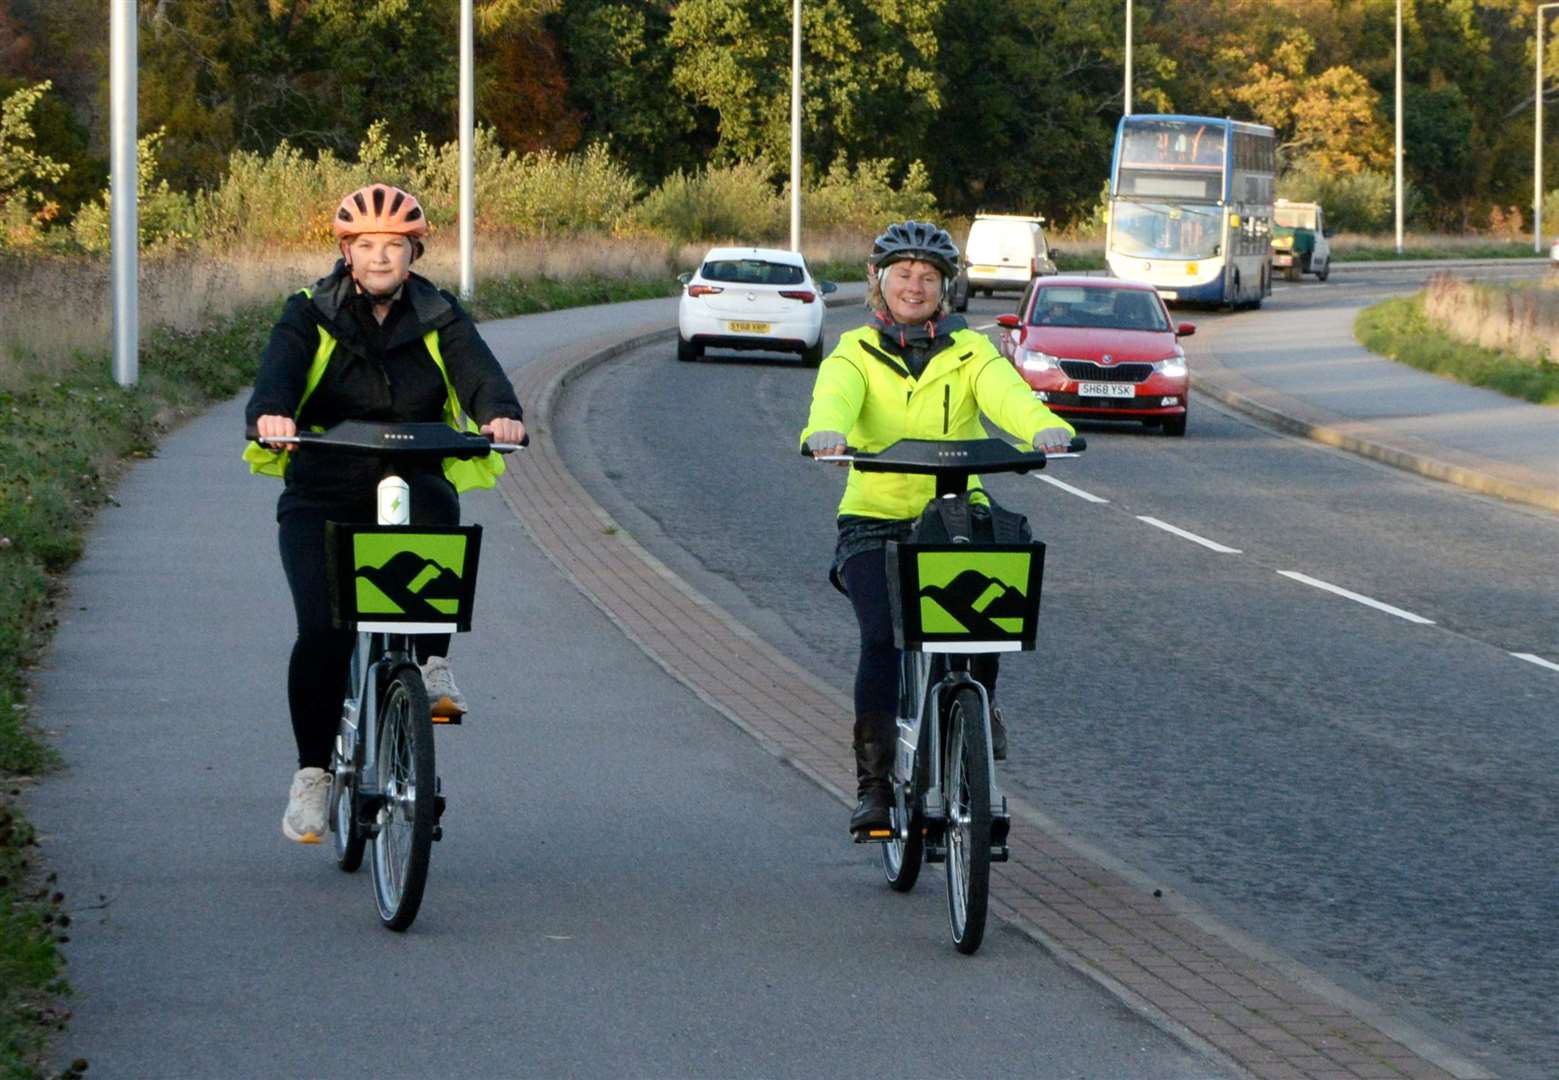 Courier reporter Imogen James previously tired out the e-bike service with Vikki Trelfer, active travel officer with Hi-Trans. Picture: James Mackenzie